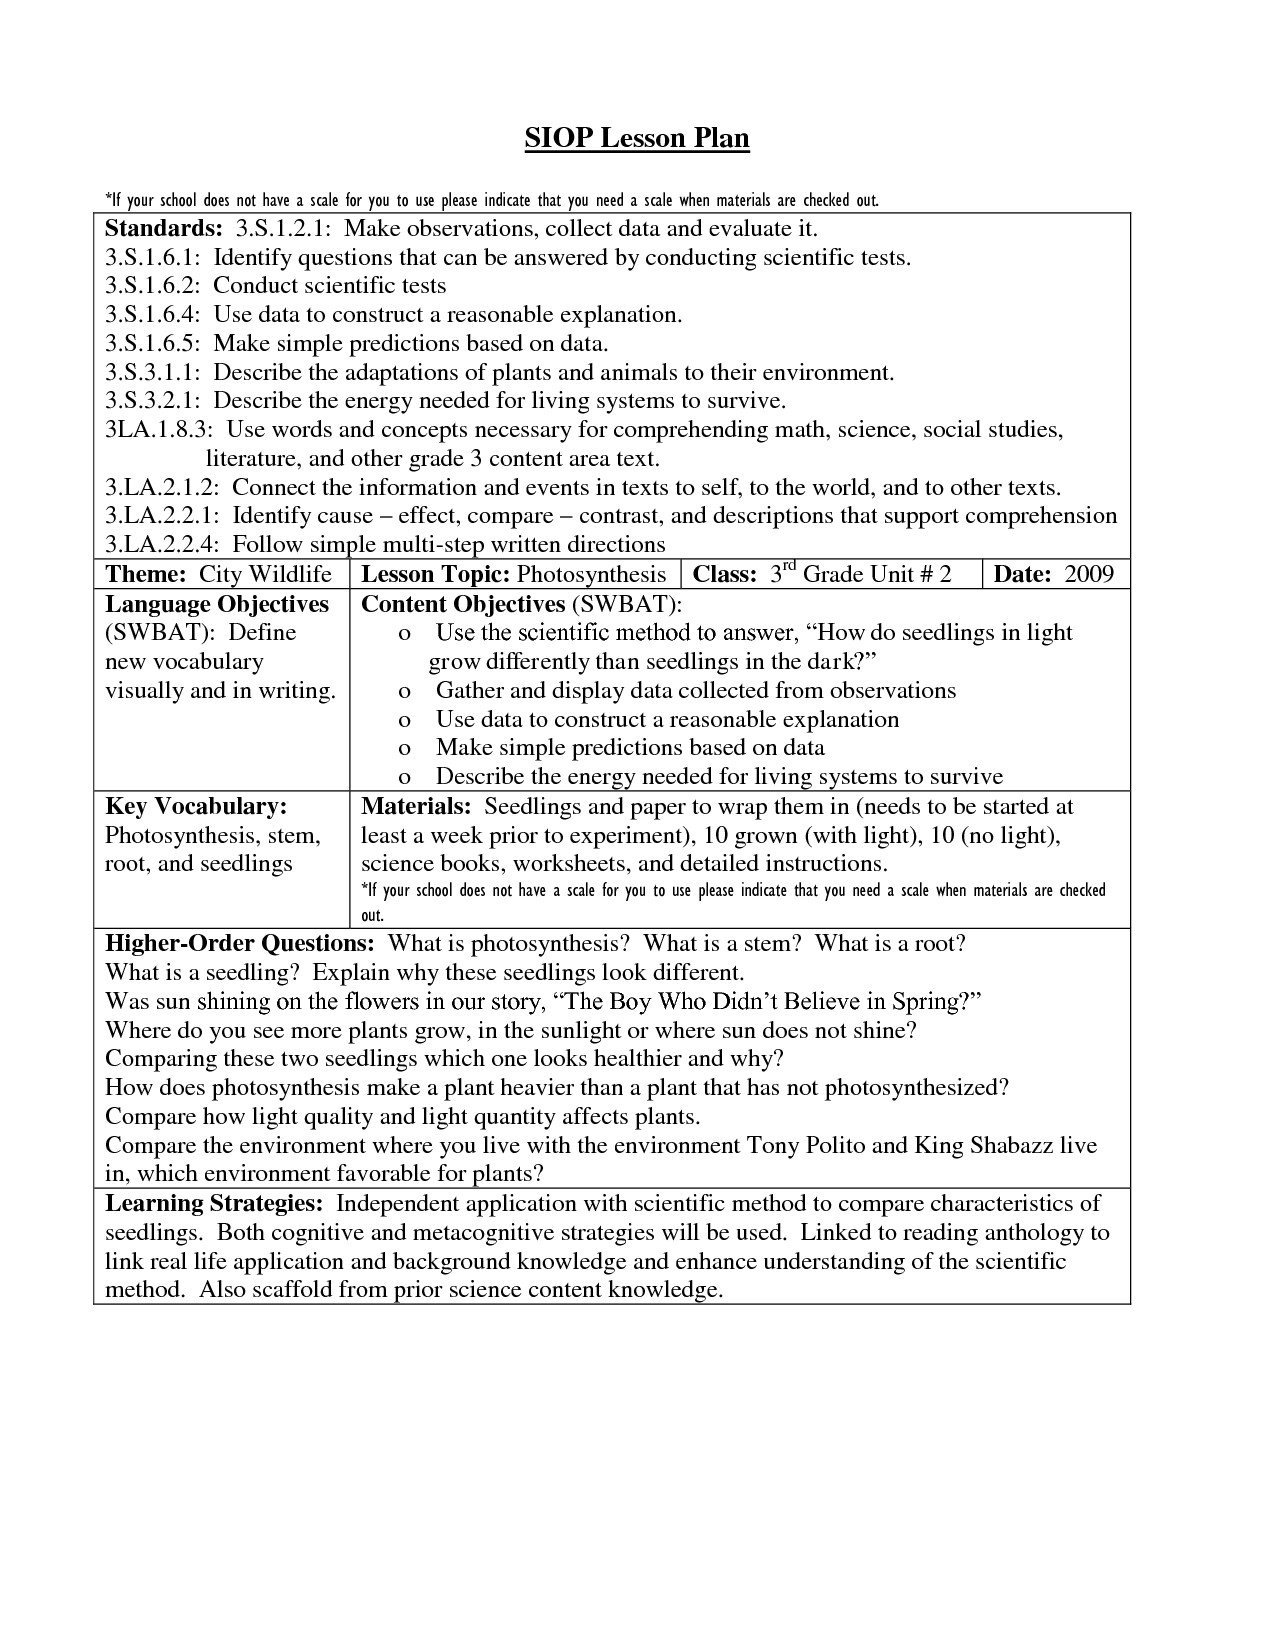 Siop Lesson Plan Template 2 16 Awesome Siop Lesson Plan Template 2 Example